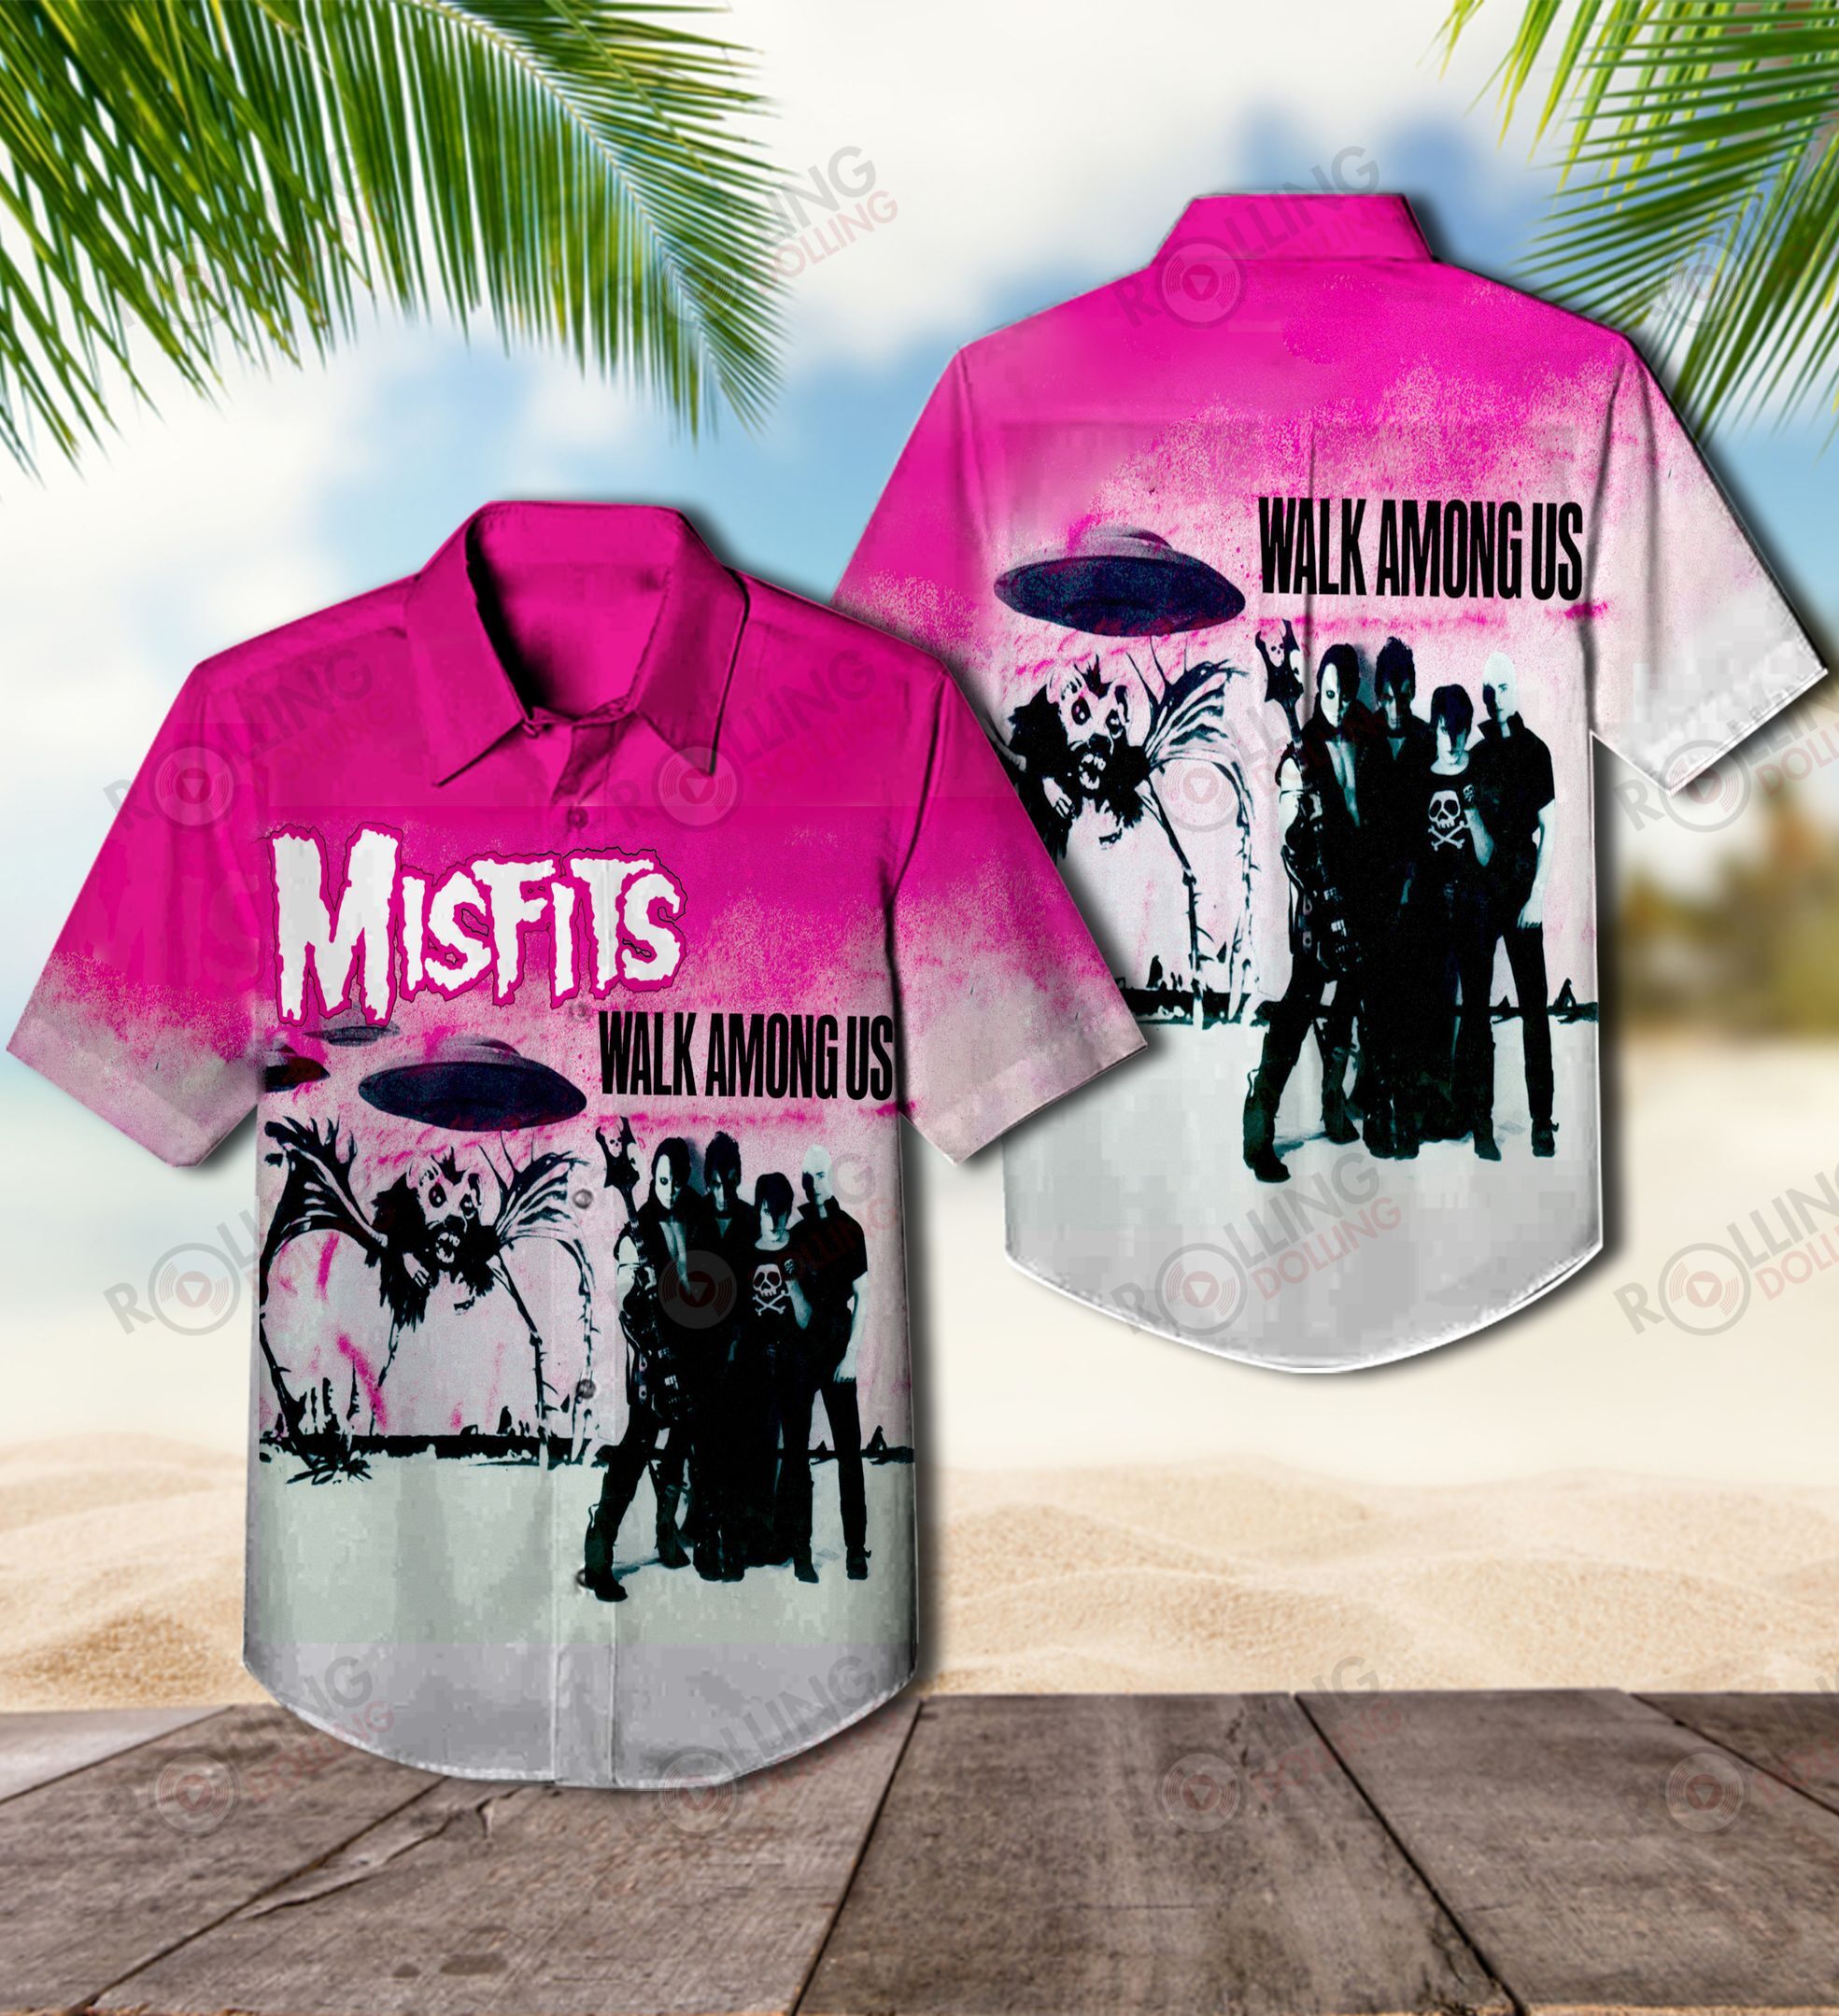 Now you can show off your love of all things band with this Hawaiian Shirt 63